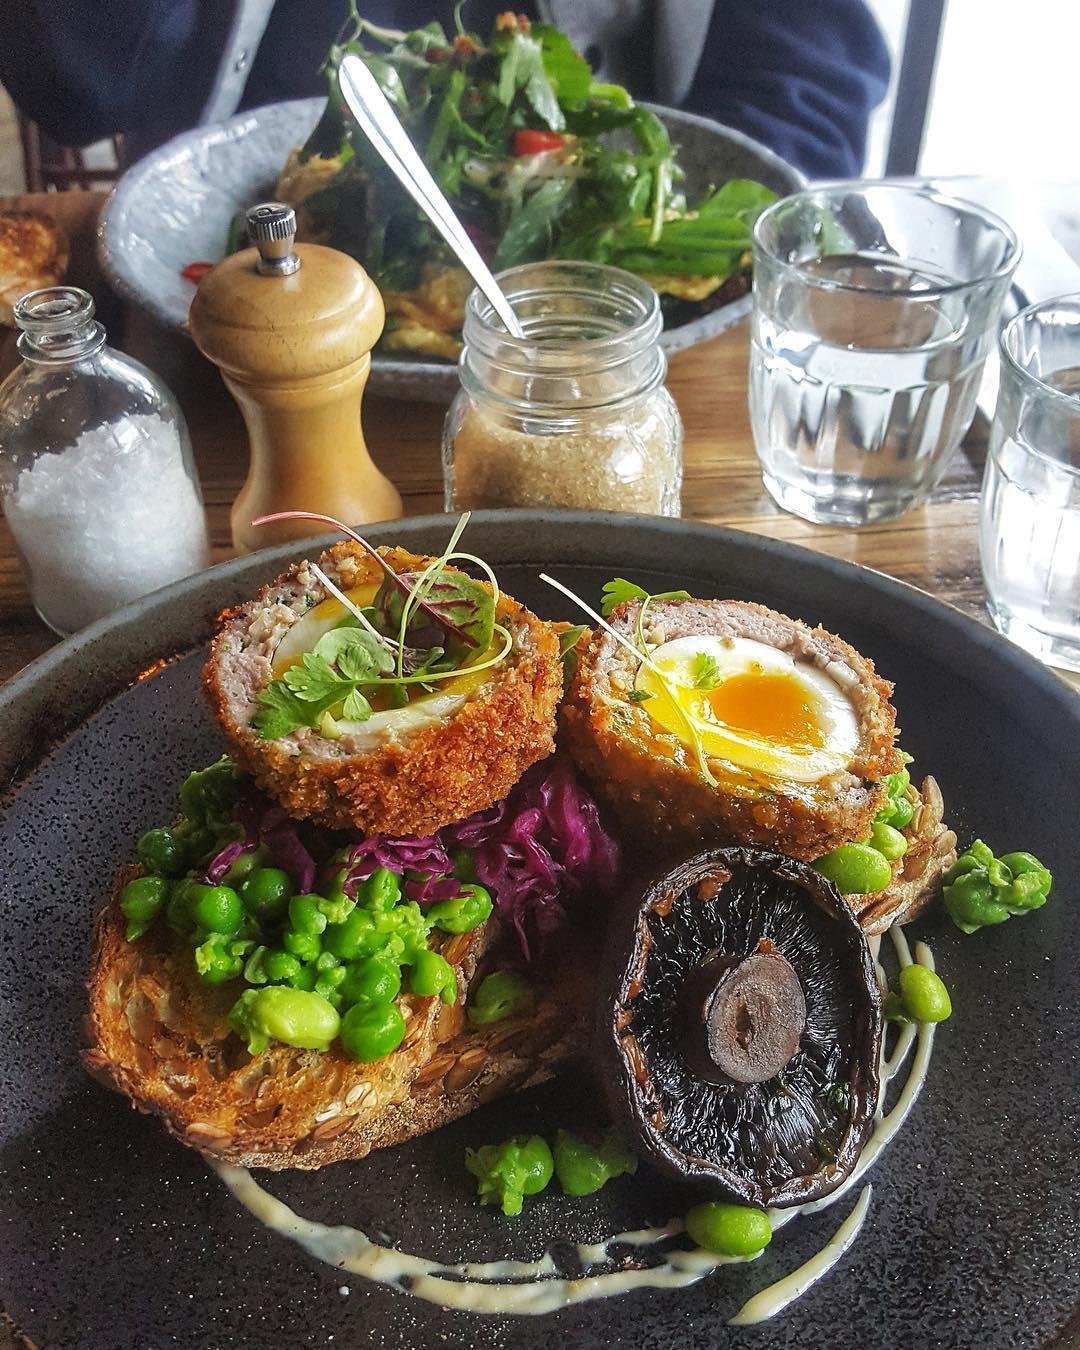 Best Foods and Restaurants in Britain – yamepy's culture blog